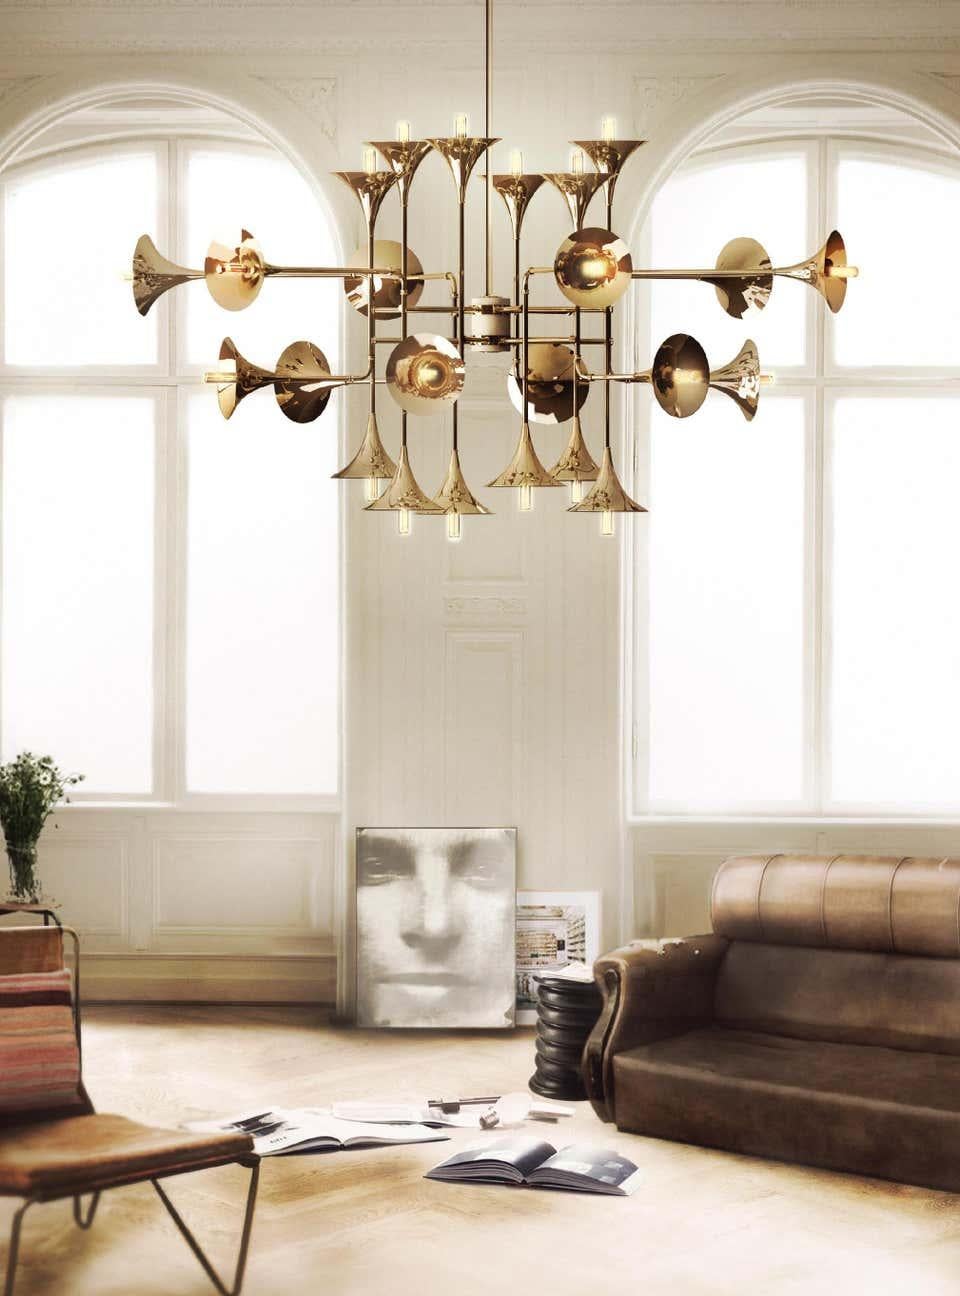 Modern chandelier instantly takes us into a music concert starring Chris Botti. The midcentury lighting design was inspired by the American trumpet player as a tribute to jazz music. With a structure handmade in brass and boasting a sophisticated